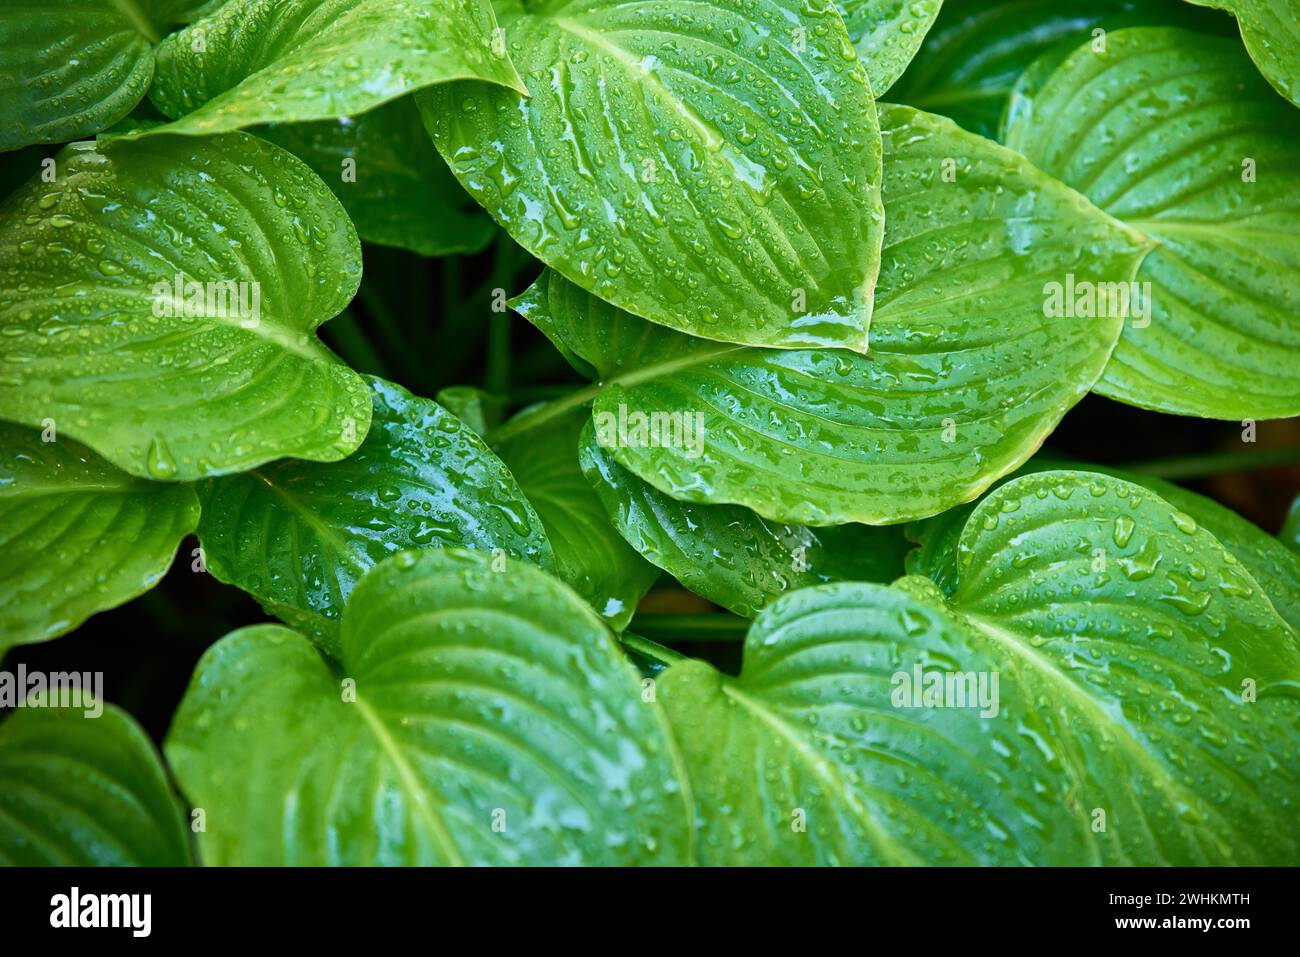 Natural background of green hosta leaves with raindrops Stock Photo